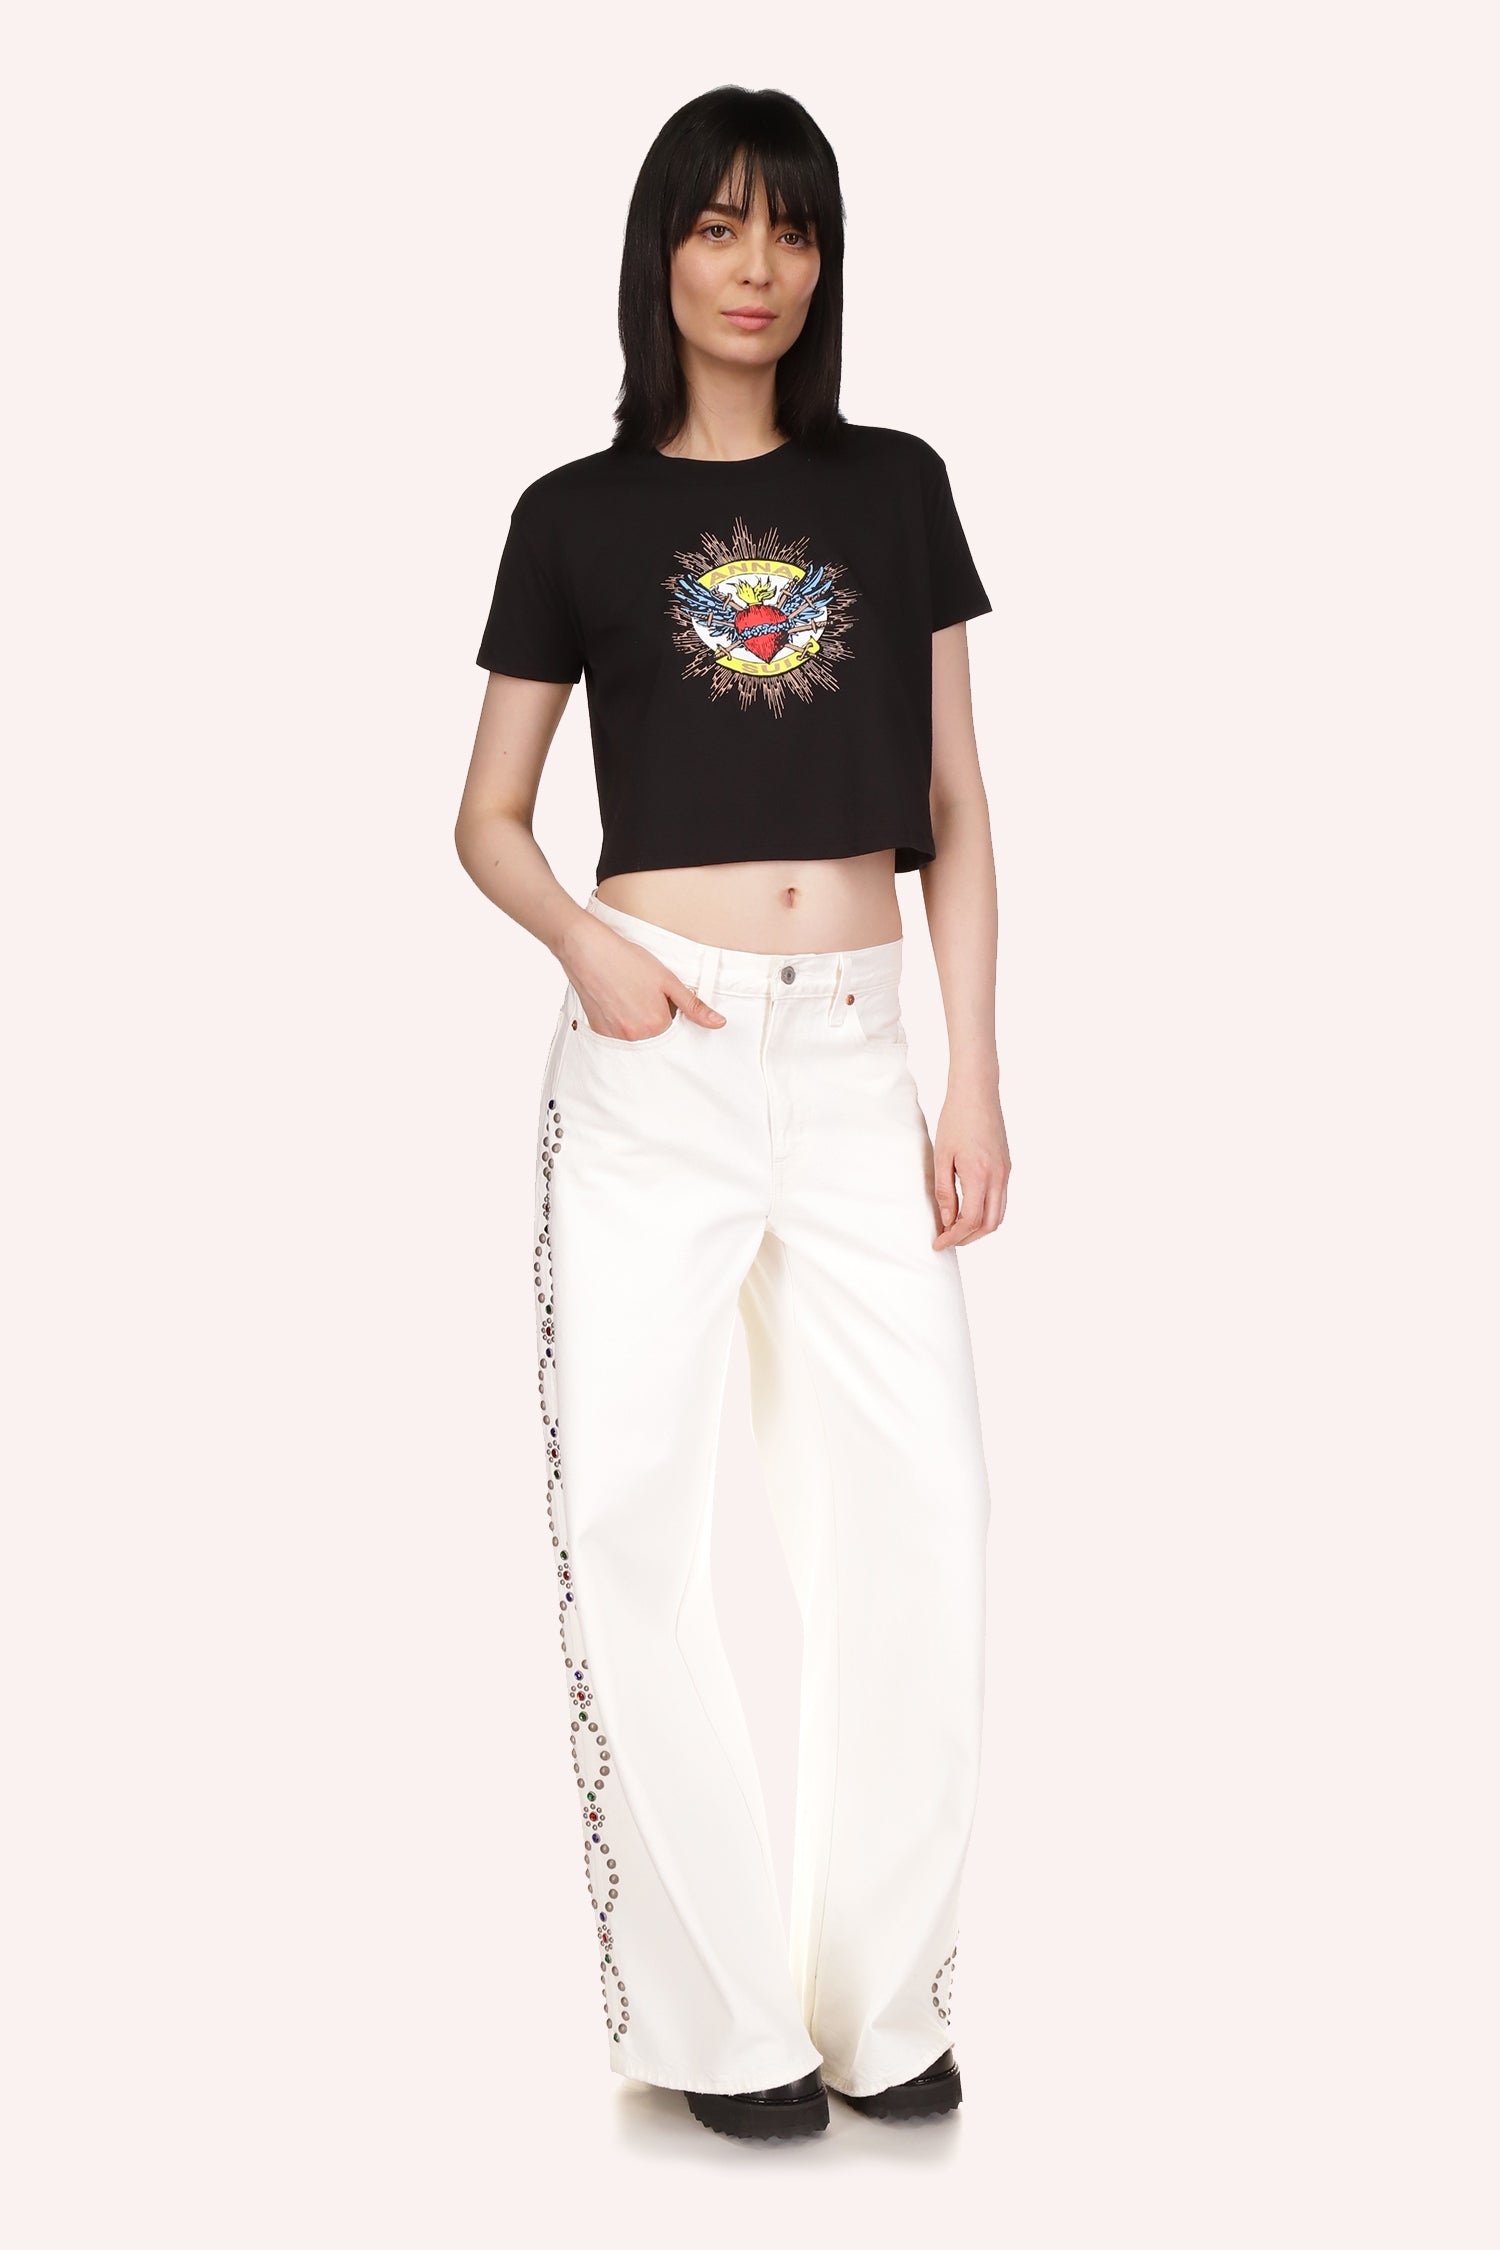 The design on a black background, a Sacred Heart in the middle of the t-shirt with the Anna Sui name included in the print